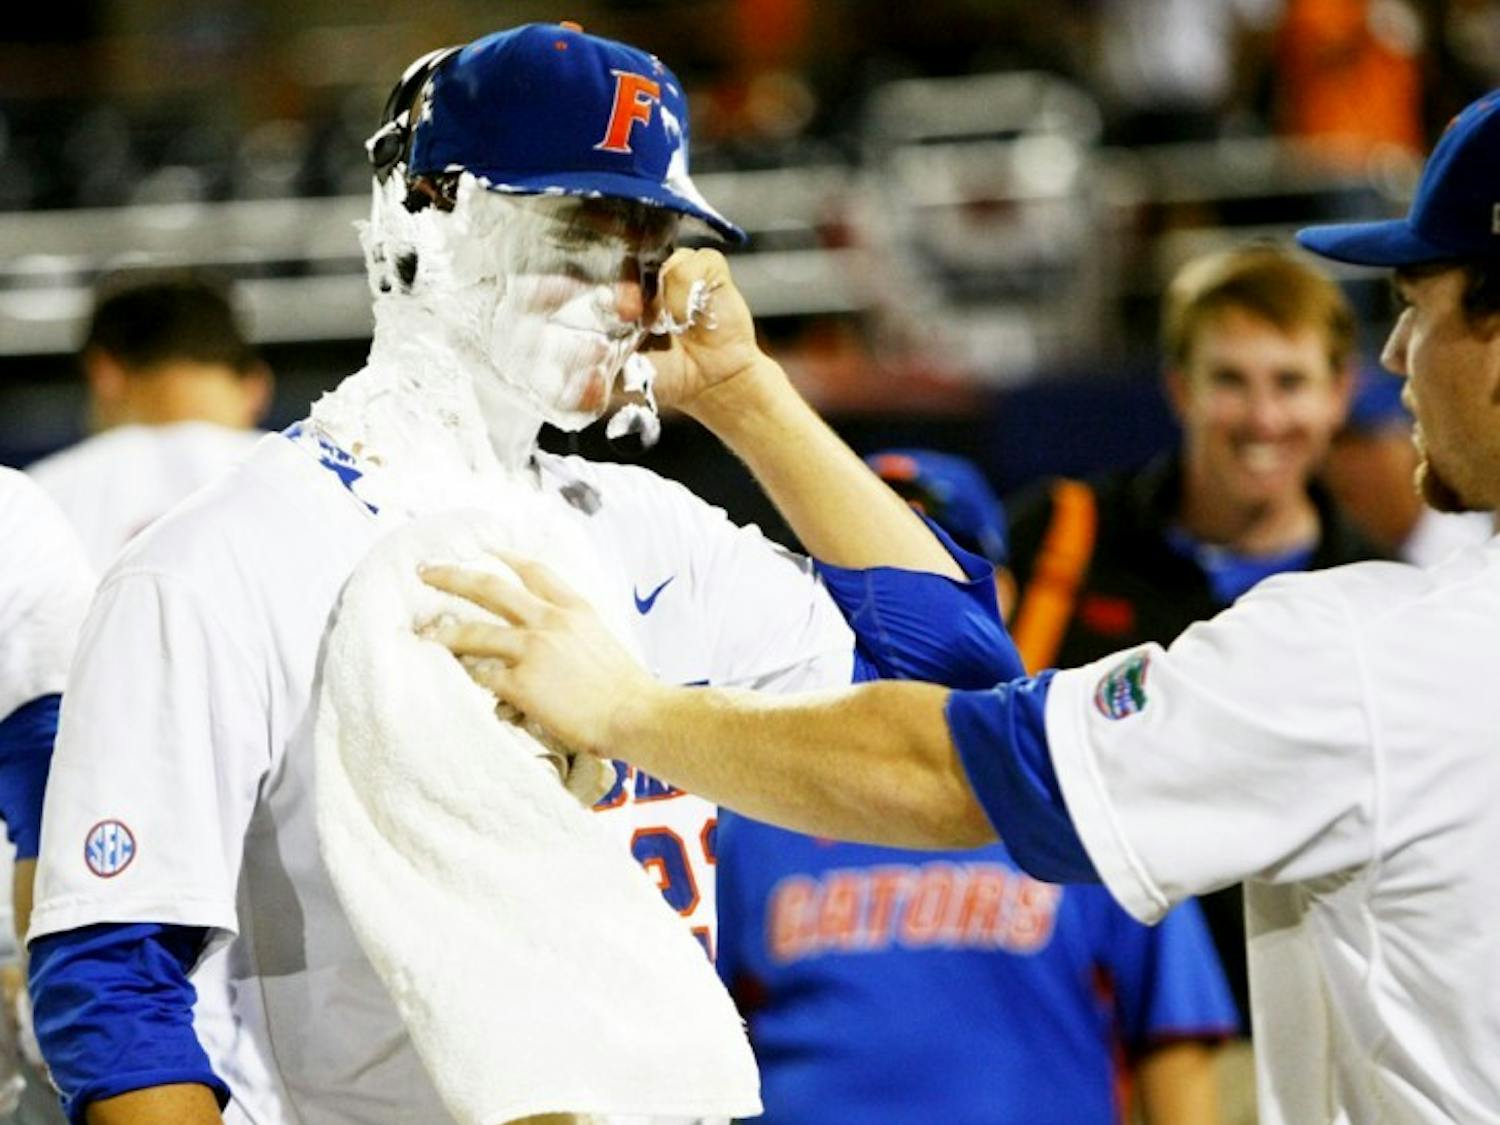 Sophomore Jonathon Crawford reacts after teammates threw a pie in his face following his no-hitter against Bethune-Cookman in the NCAA Gainesville Regional opener June 1.